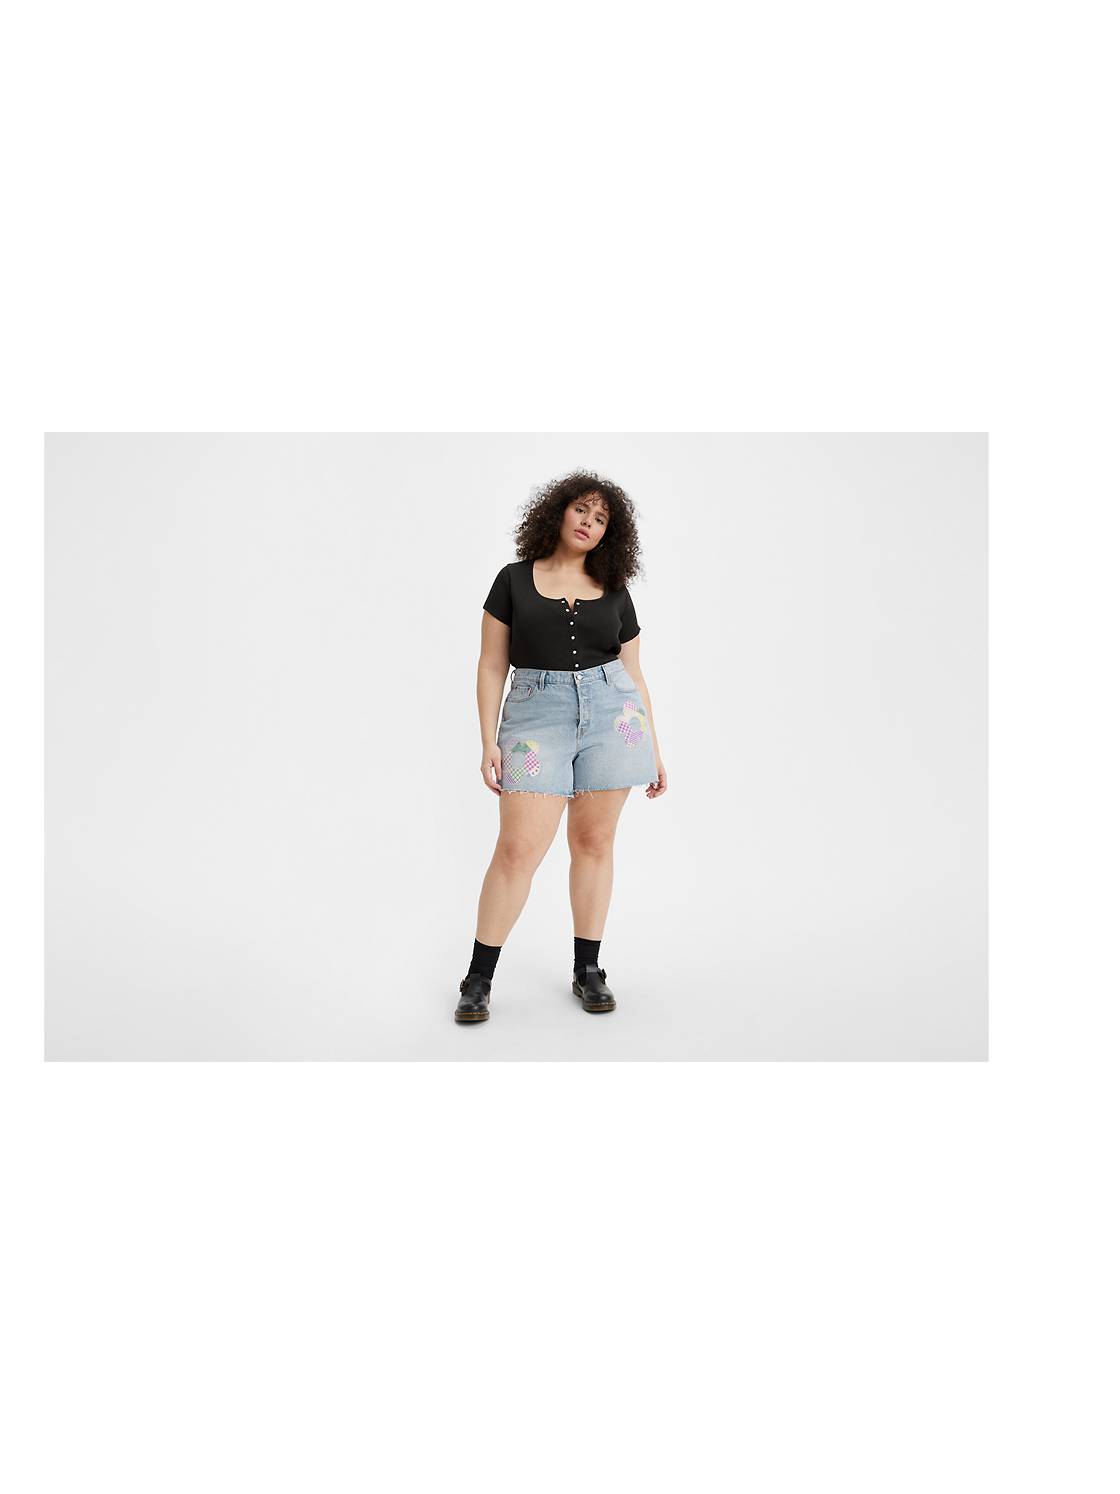 20 Ideas on How to Wear High Waisted Shorts for Plus Size Women